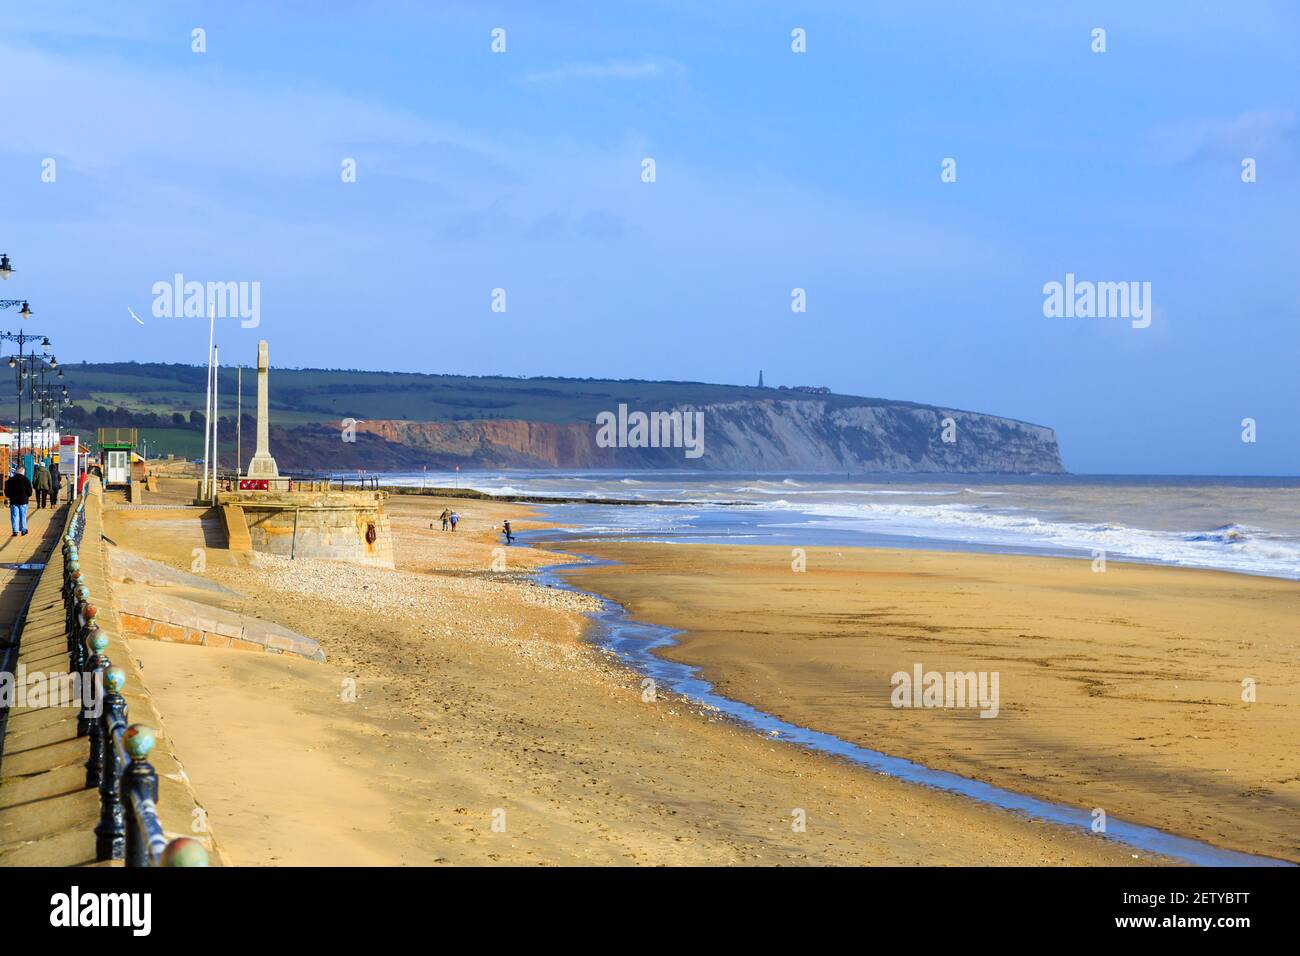 Panoramic view along Sandown sandy beach, shoreline and cliffs at low tide, Sandown, south-east coast of the Isle of Wight, southern England in winter Stock Photo